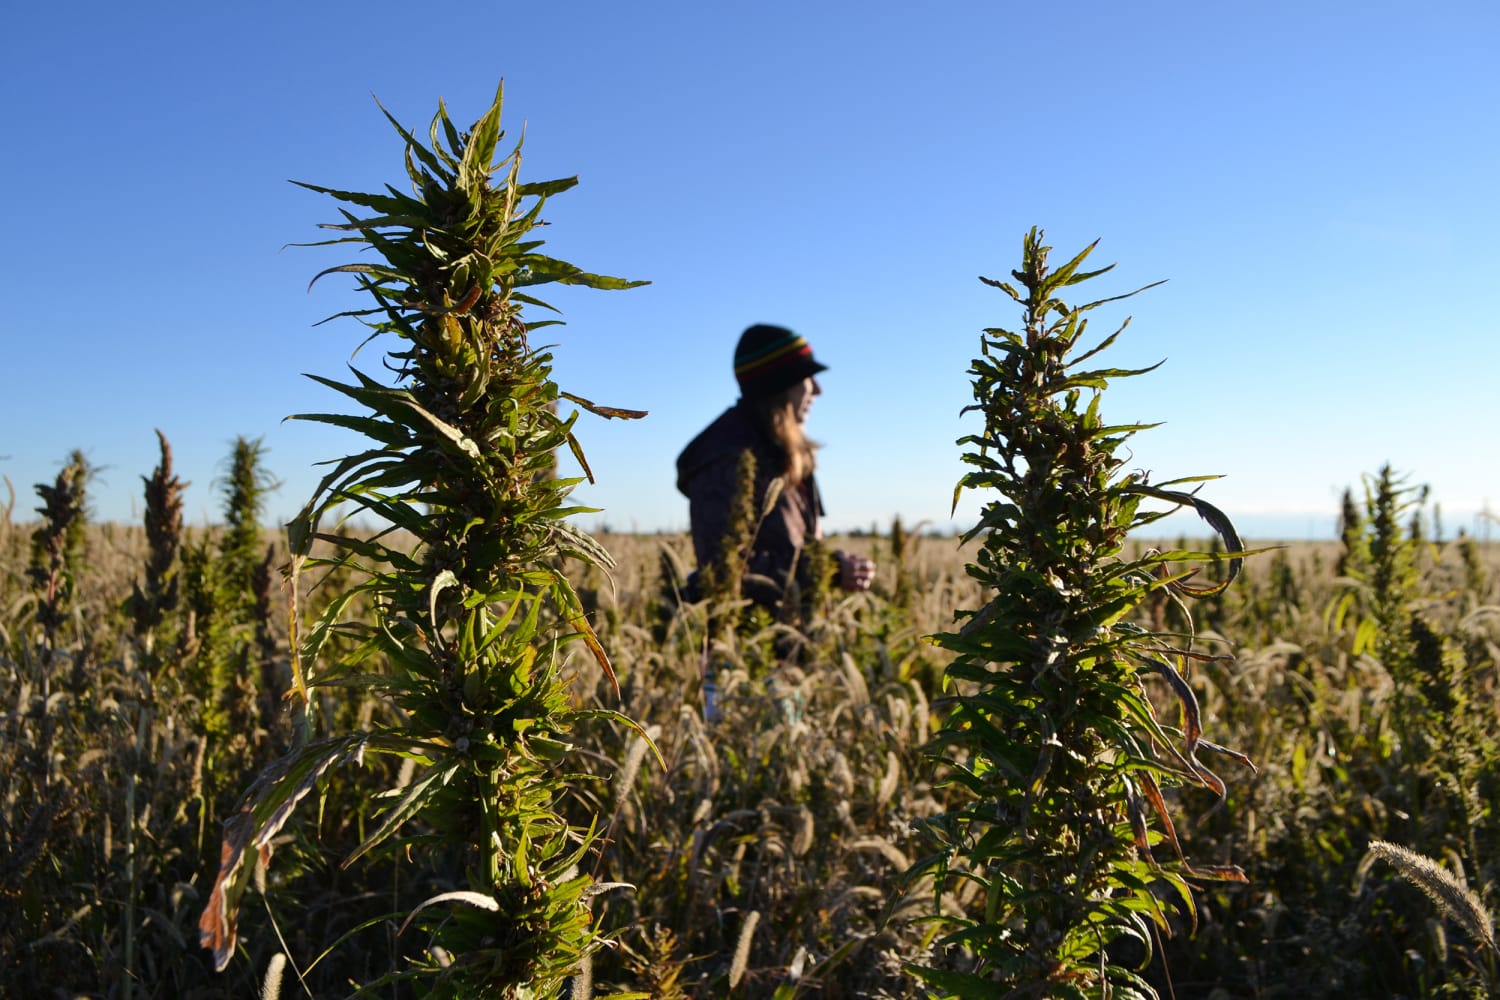 High anxiety: Proposed U.S. hemp rules worry industry.